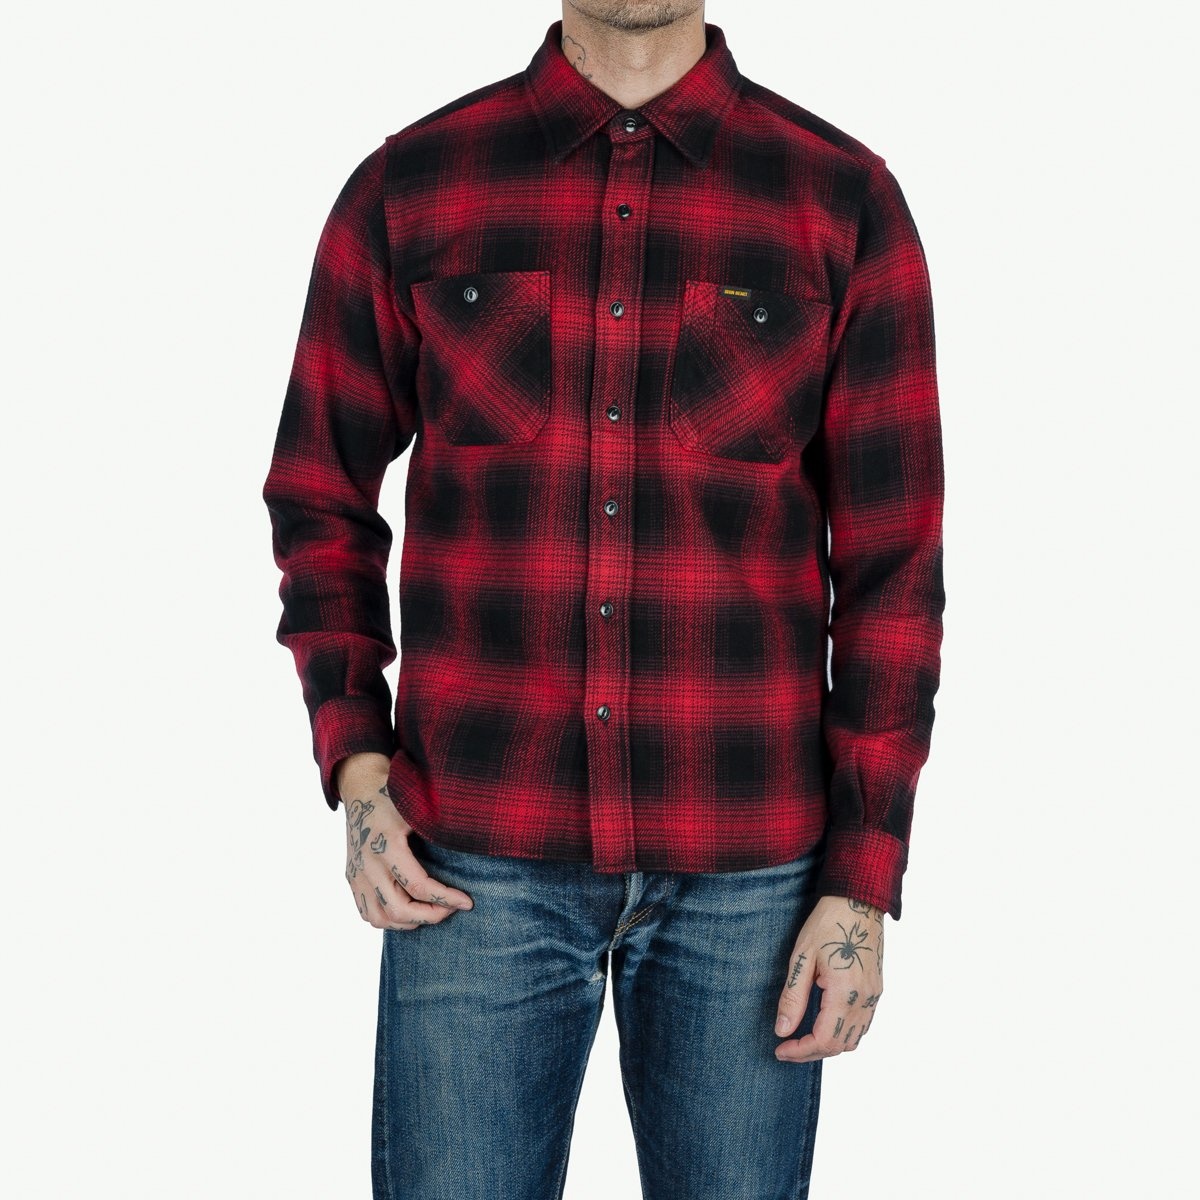 IHSH-265-RED Ultra Heavy Flannel Ombré Check Work Shirt - Red/Black - 2